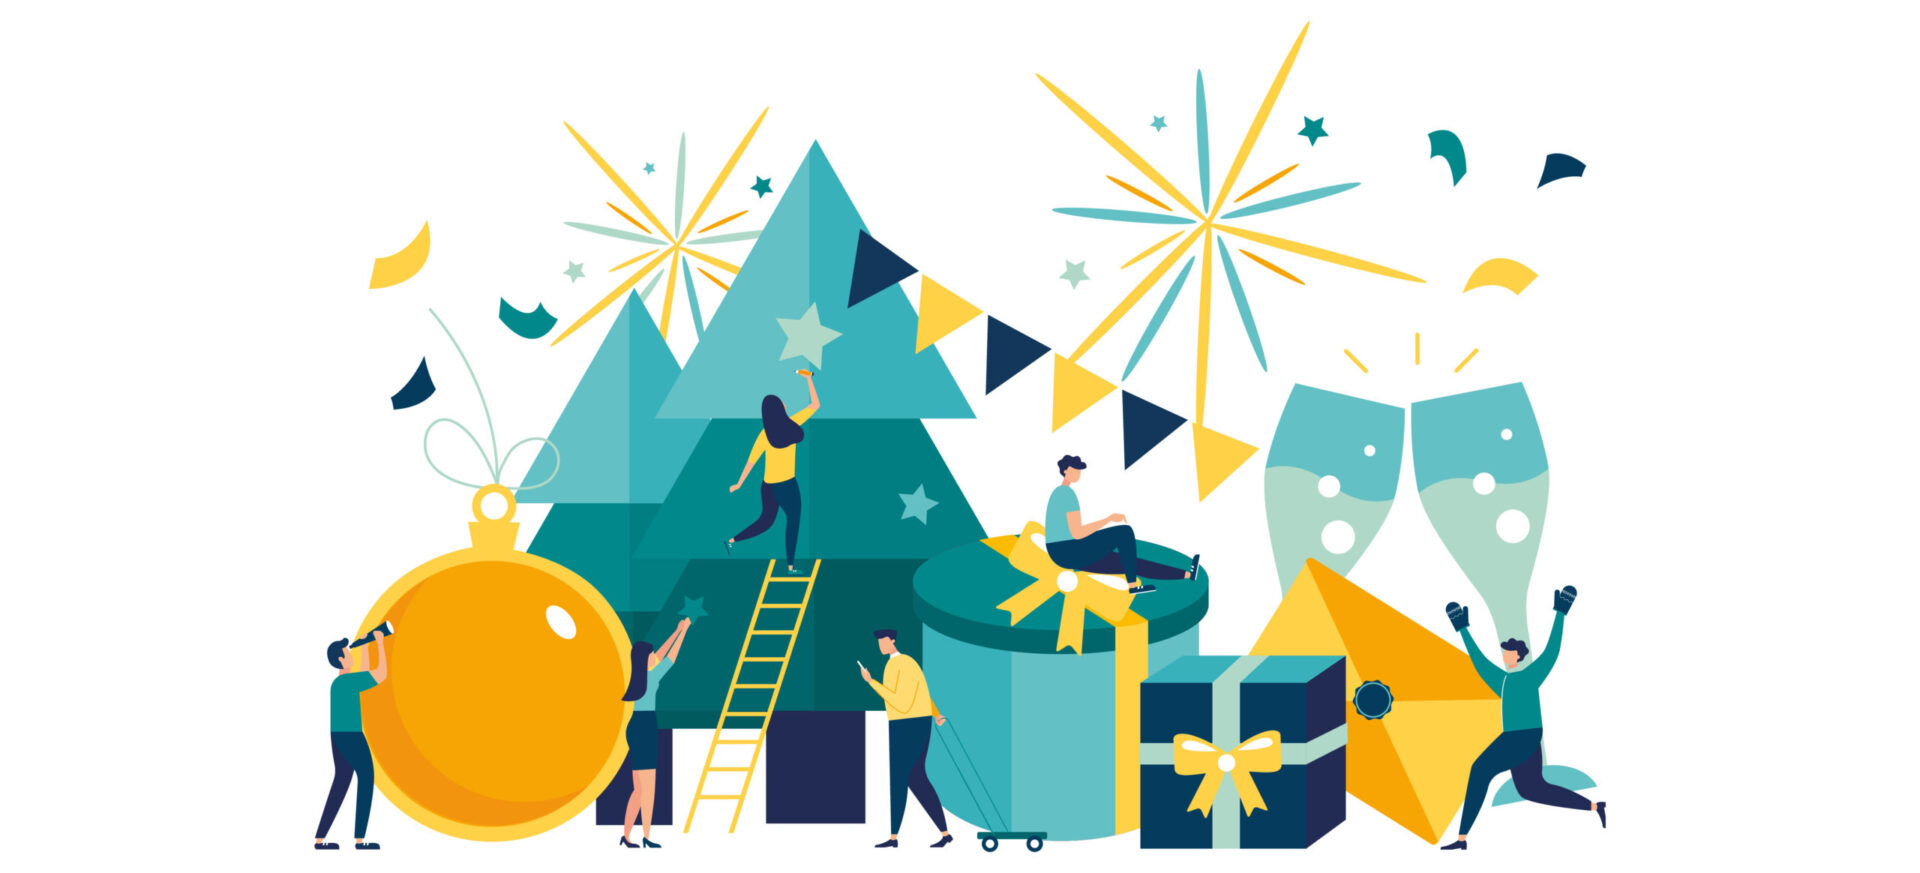 4 Rewards and Recognition Ideas to Boost Employee Engagement over the Holiday Season